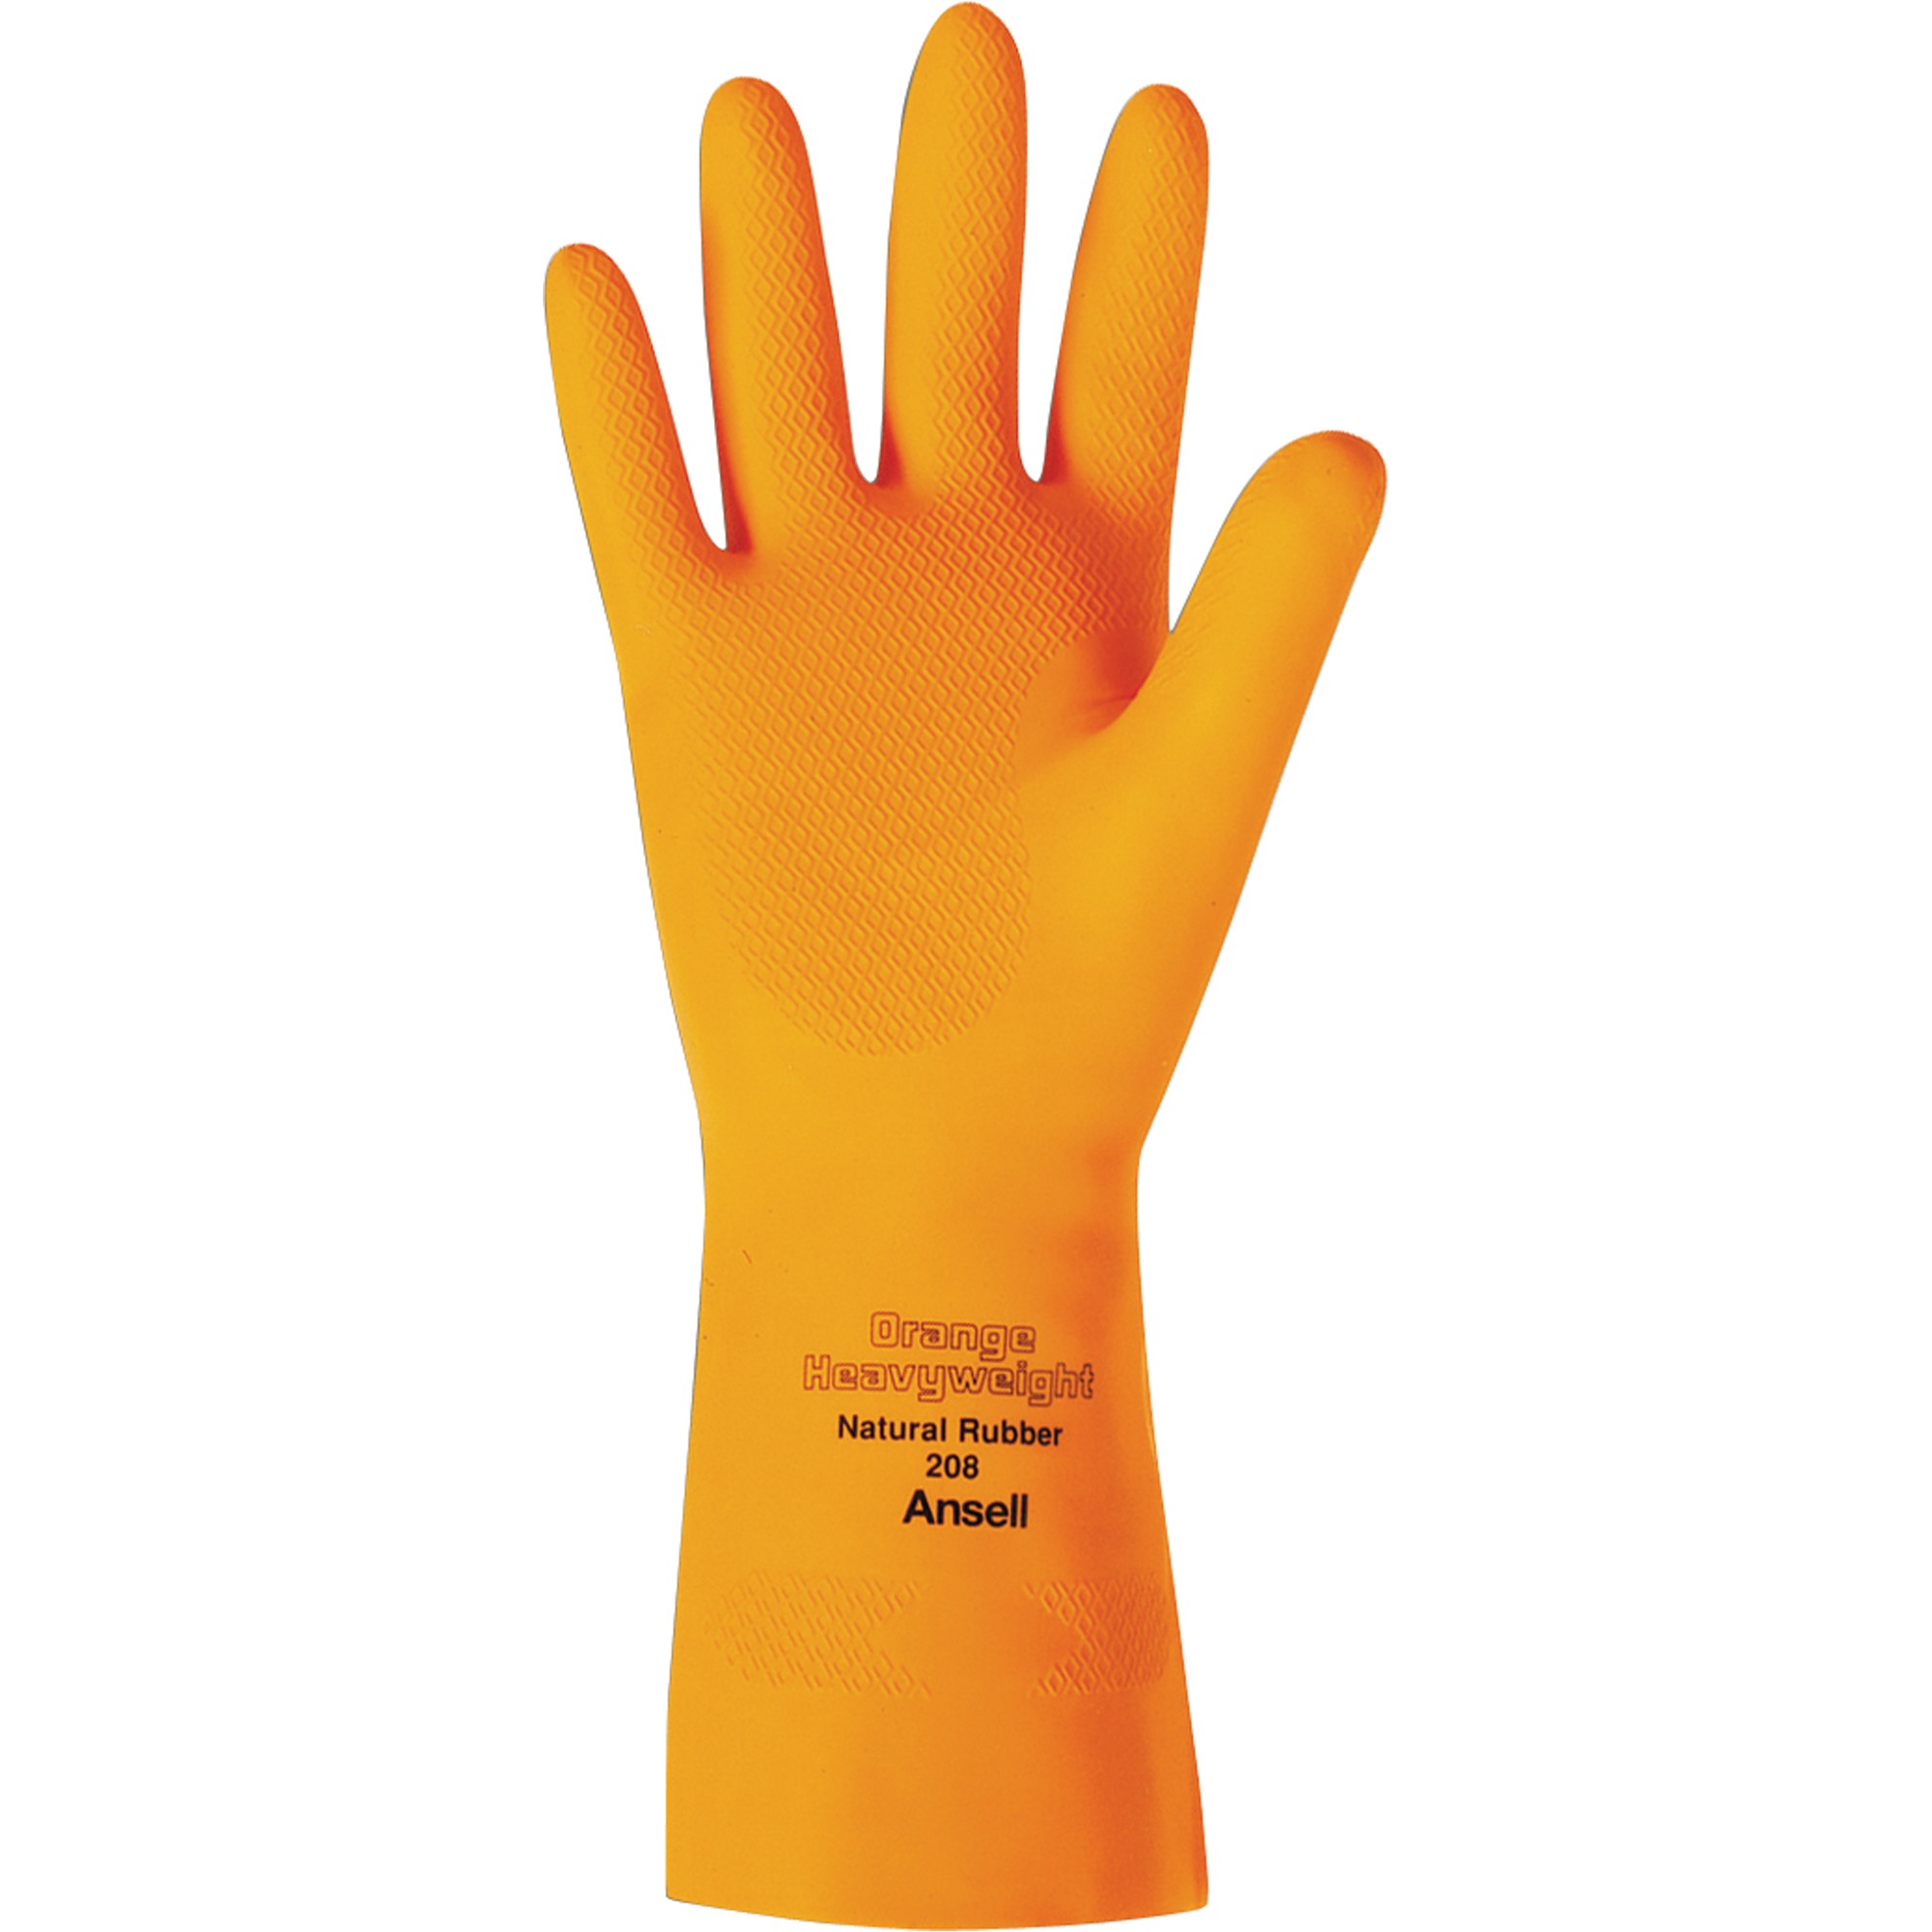 Orange latex glove textured 13 in long and 29 mils thick